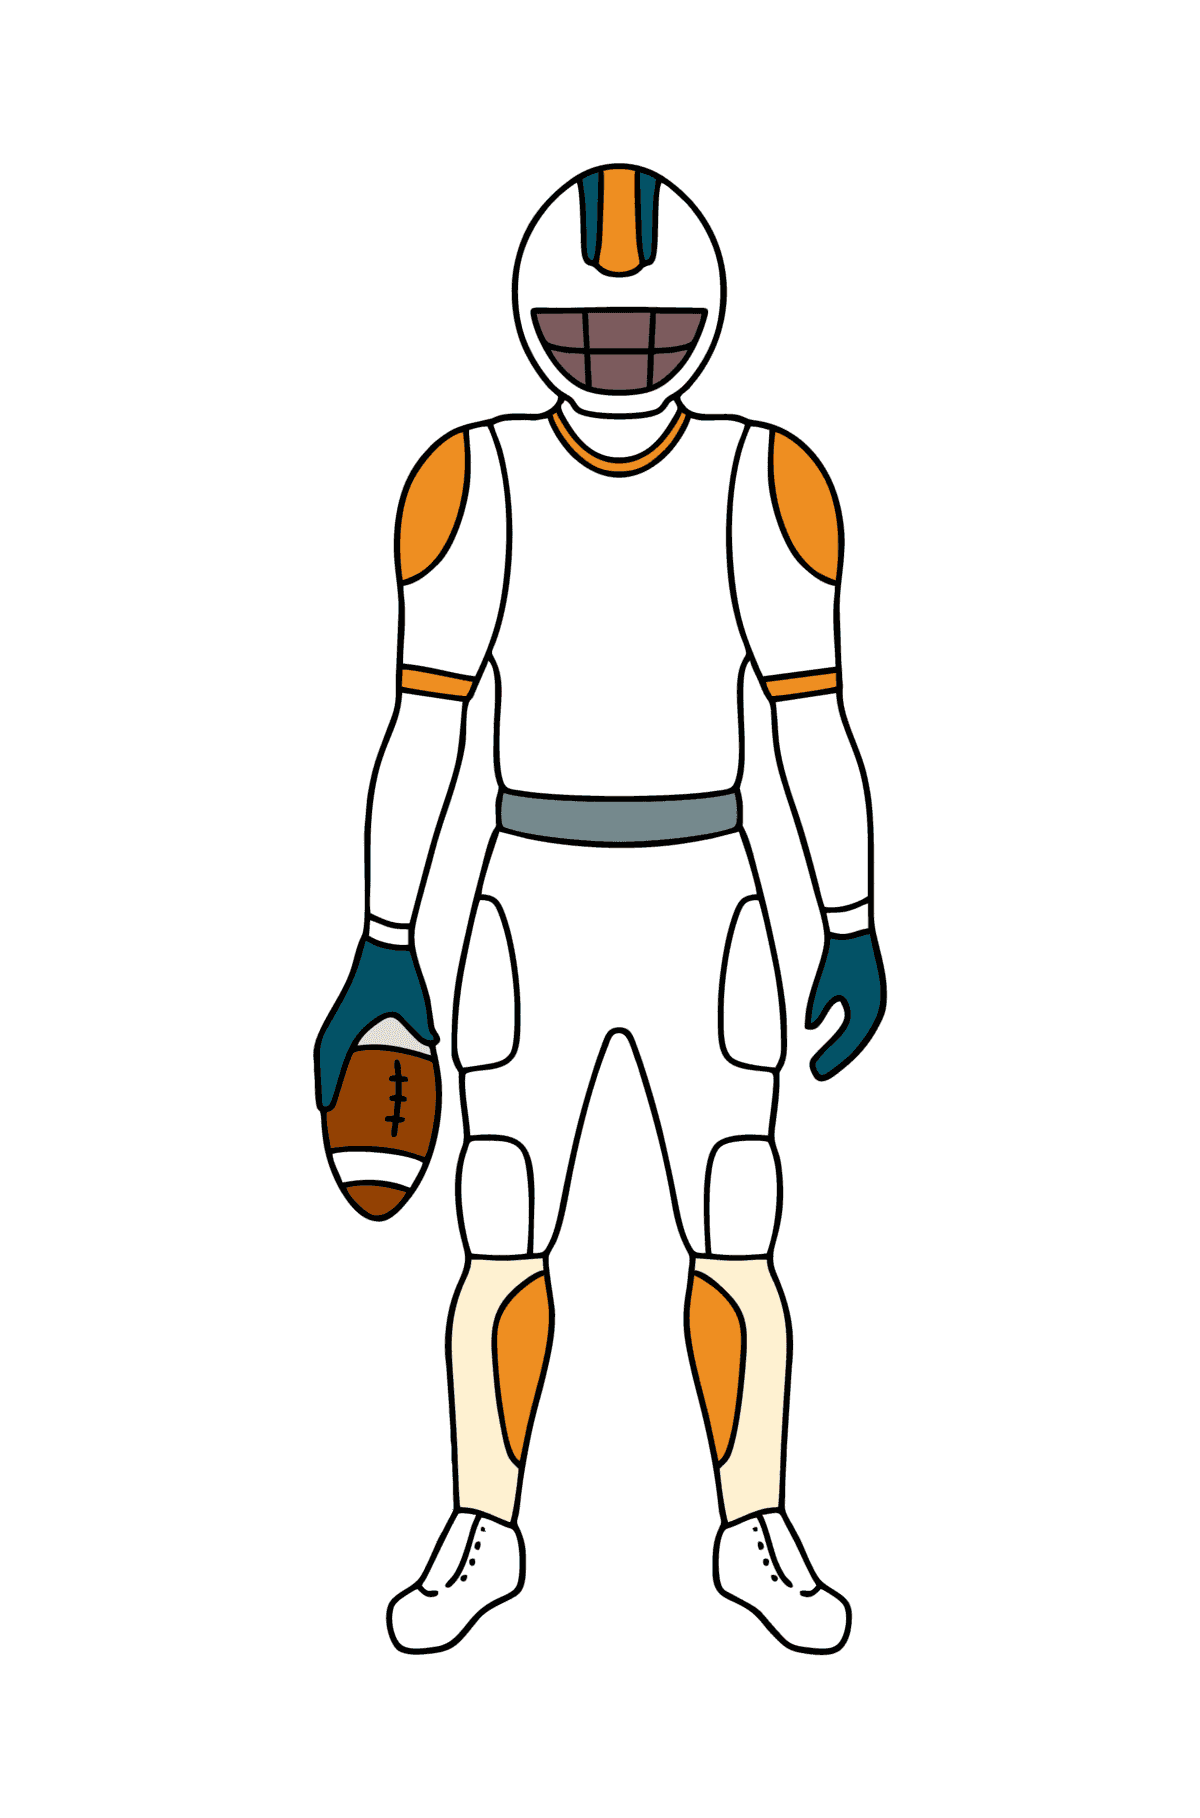 NFL Football player сoloring page - Coloring Pages for Kids